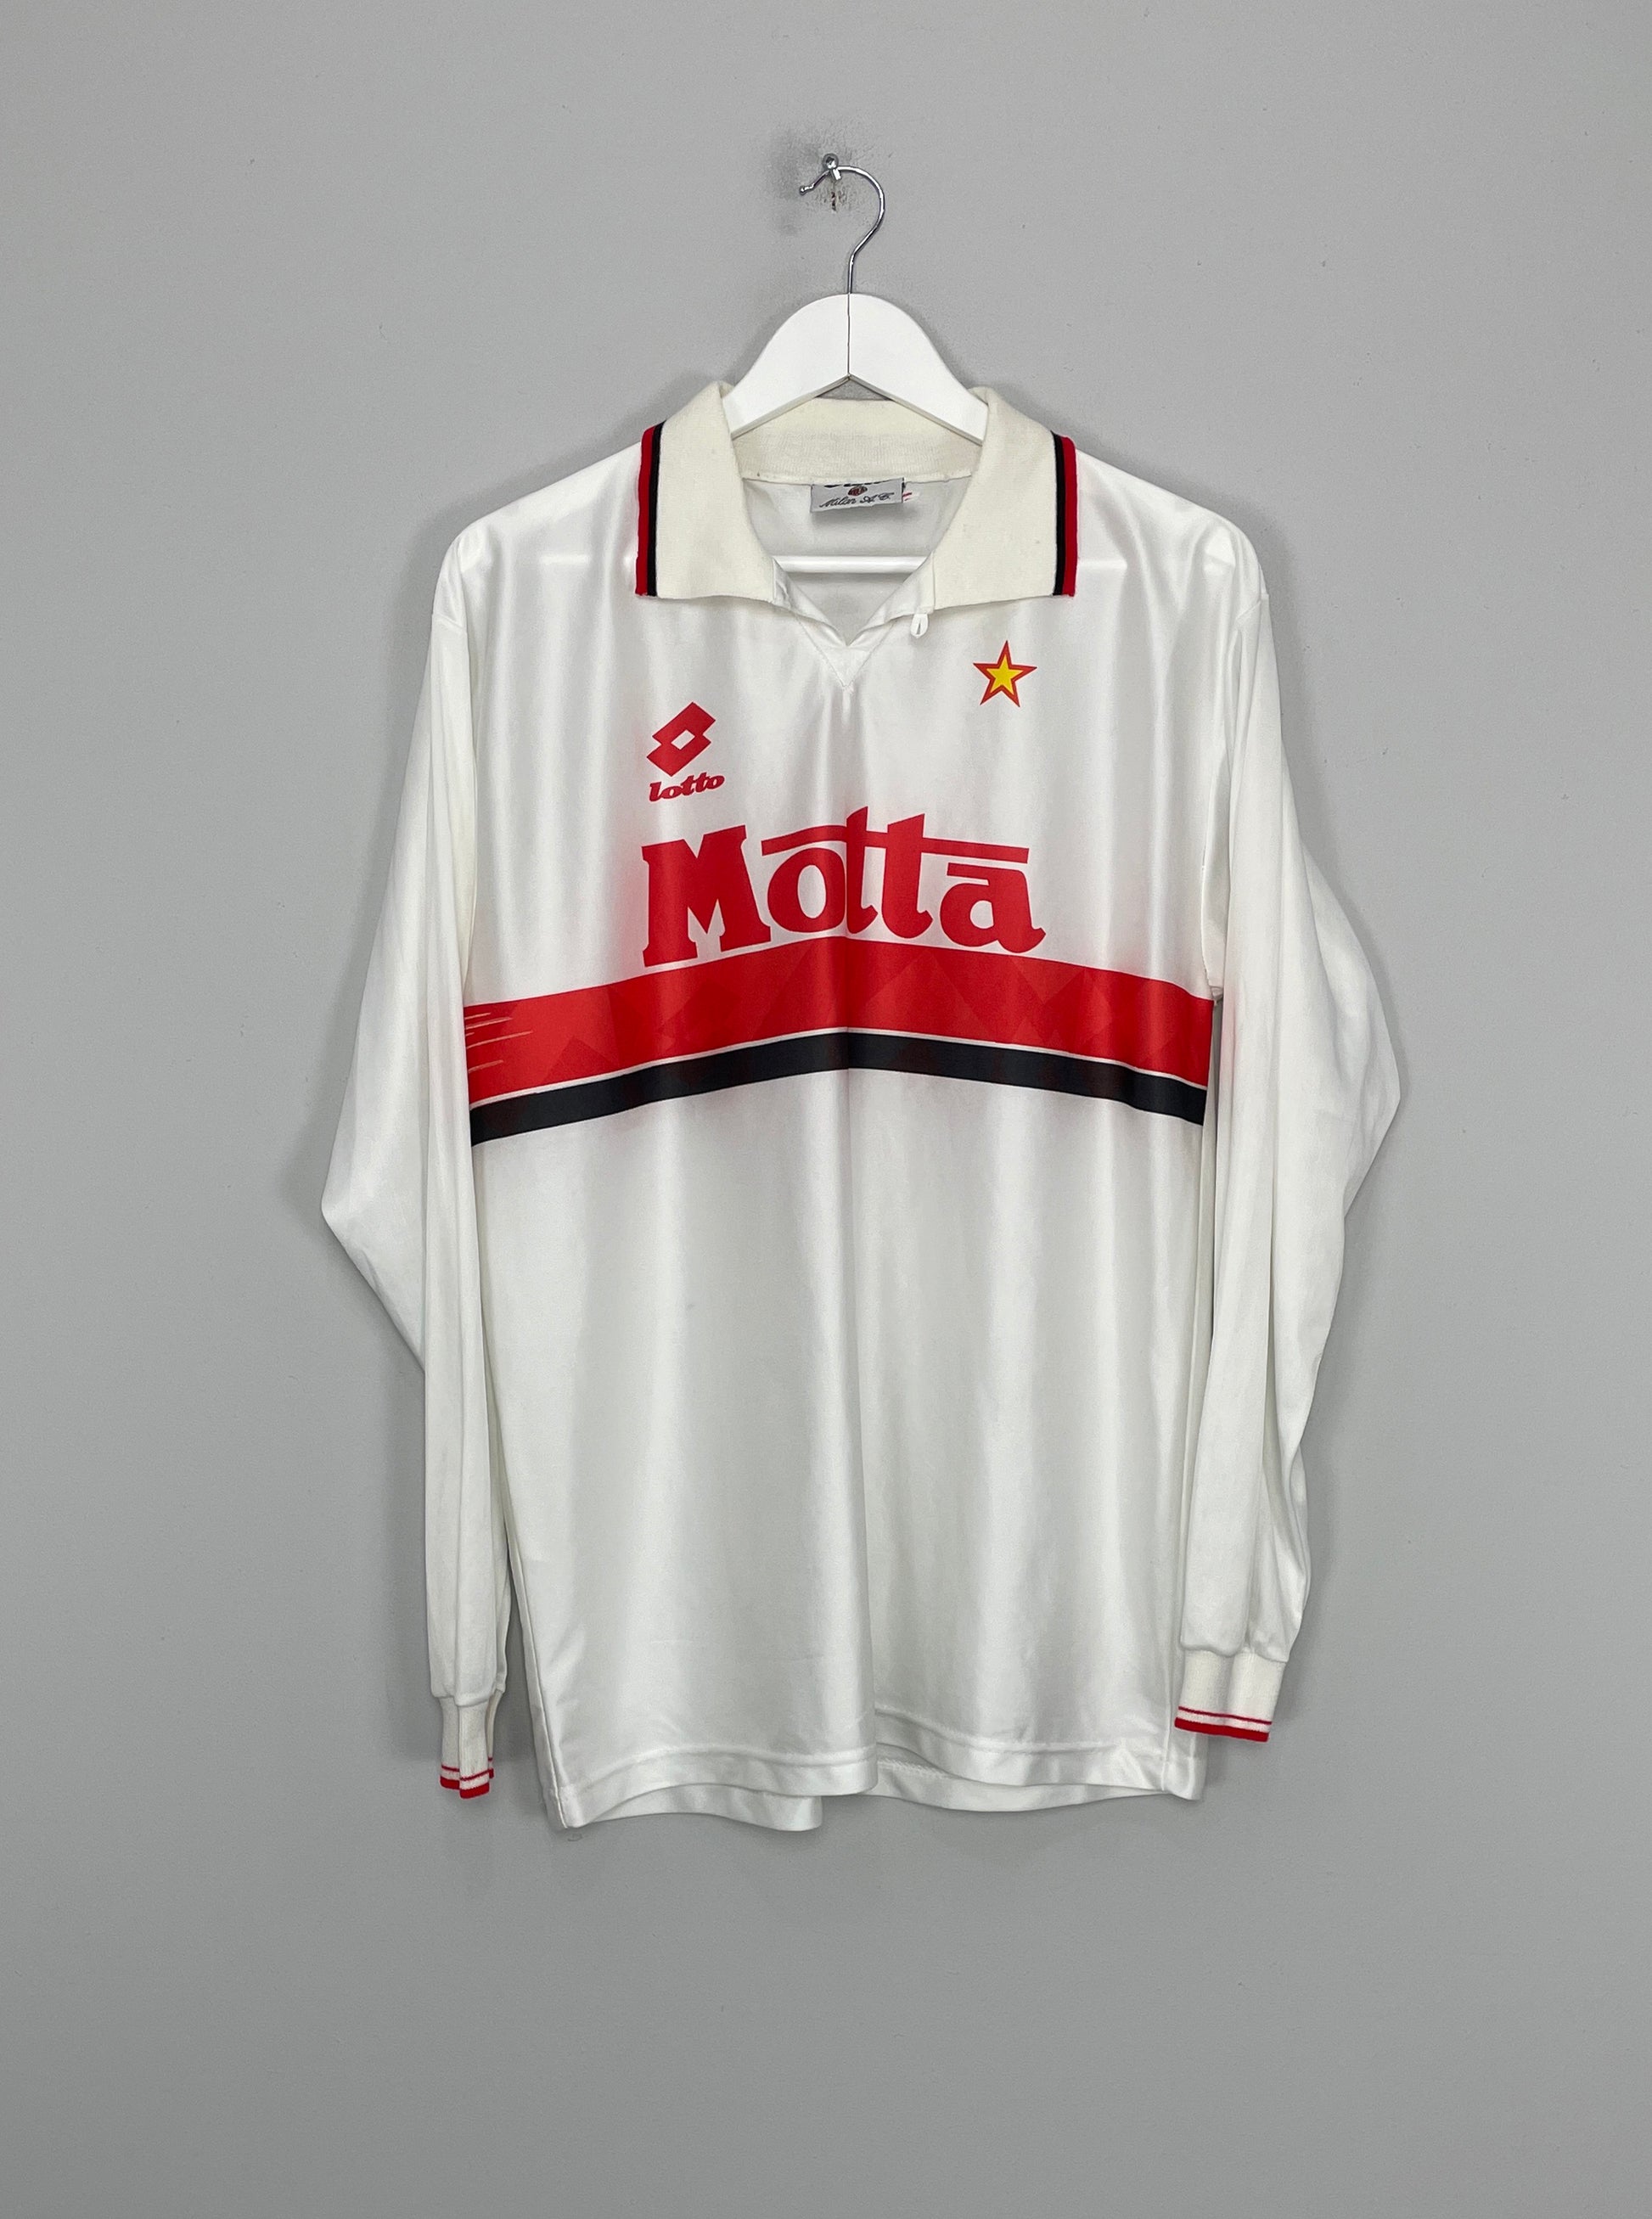 Image of the AC Milan shirt from the 1993/94 season